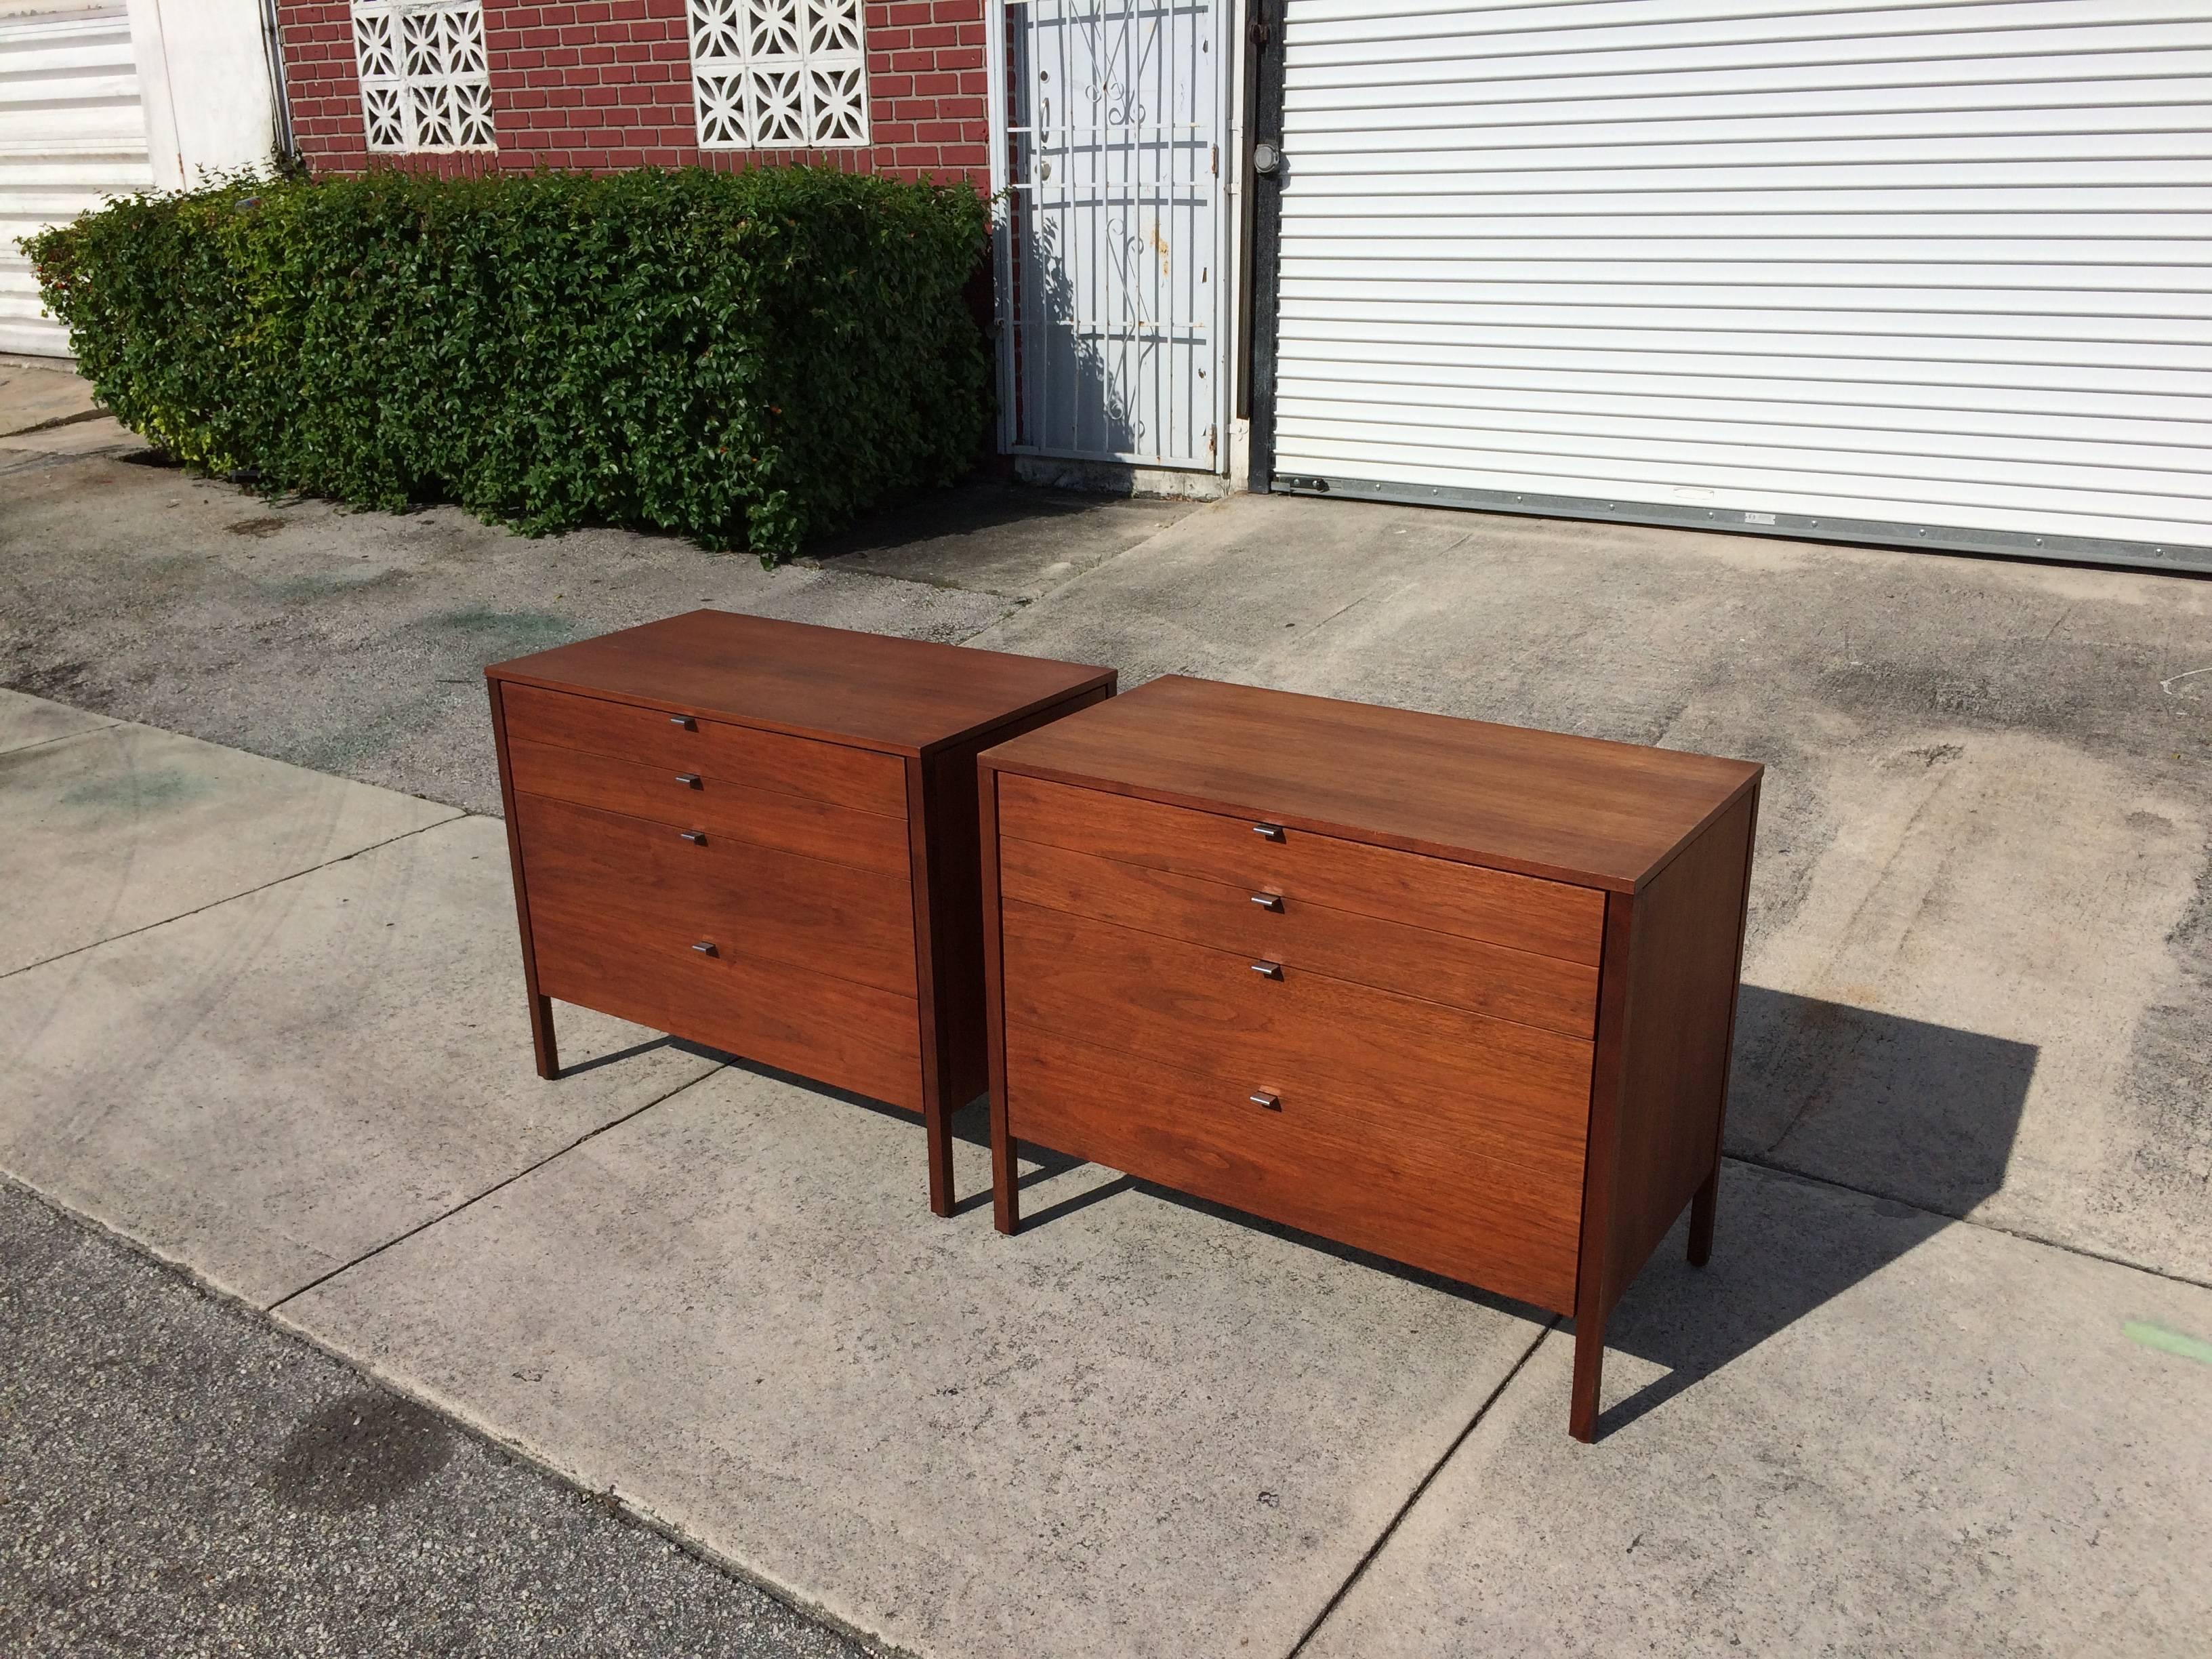 All Walnut chests with white backs, each chest has four drawers.